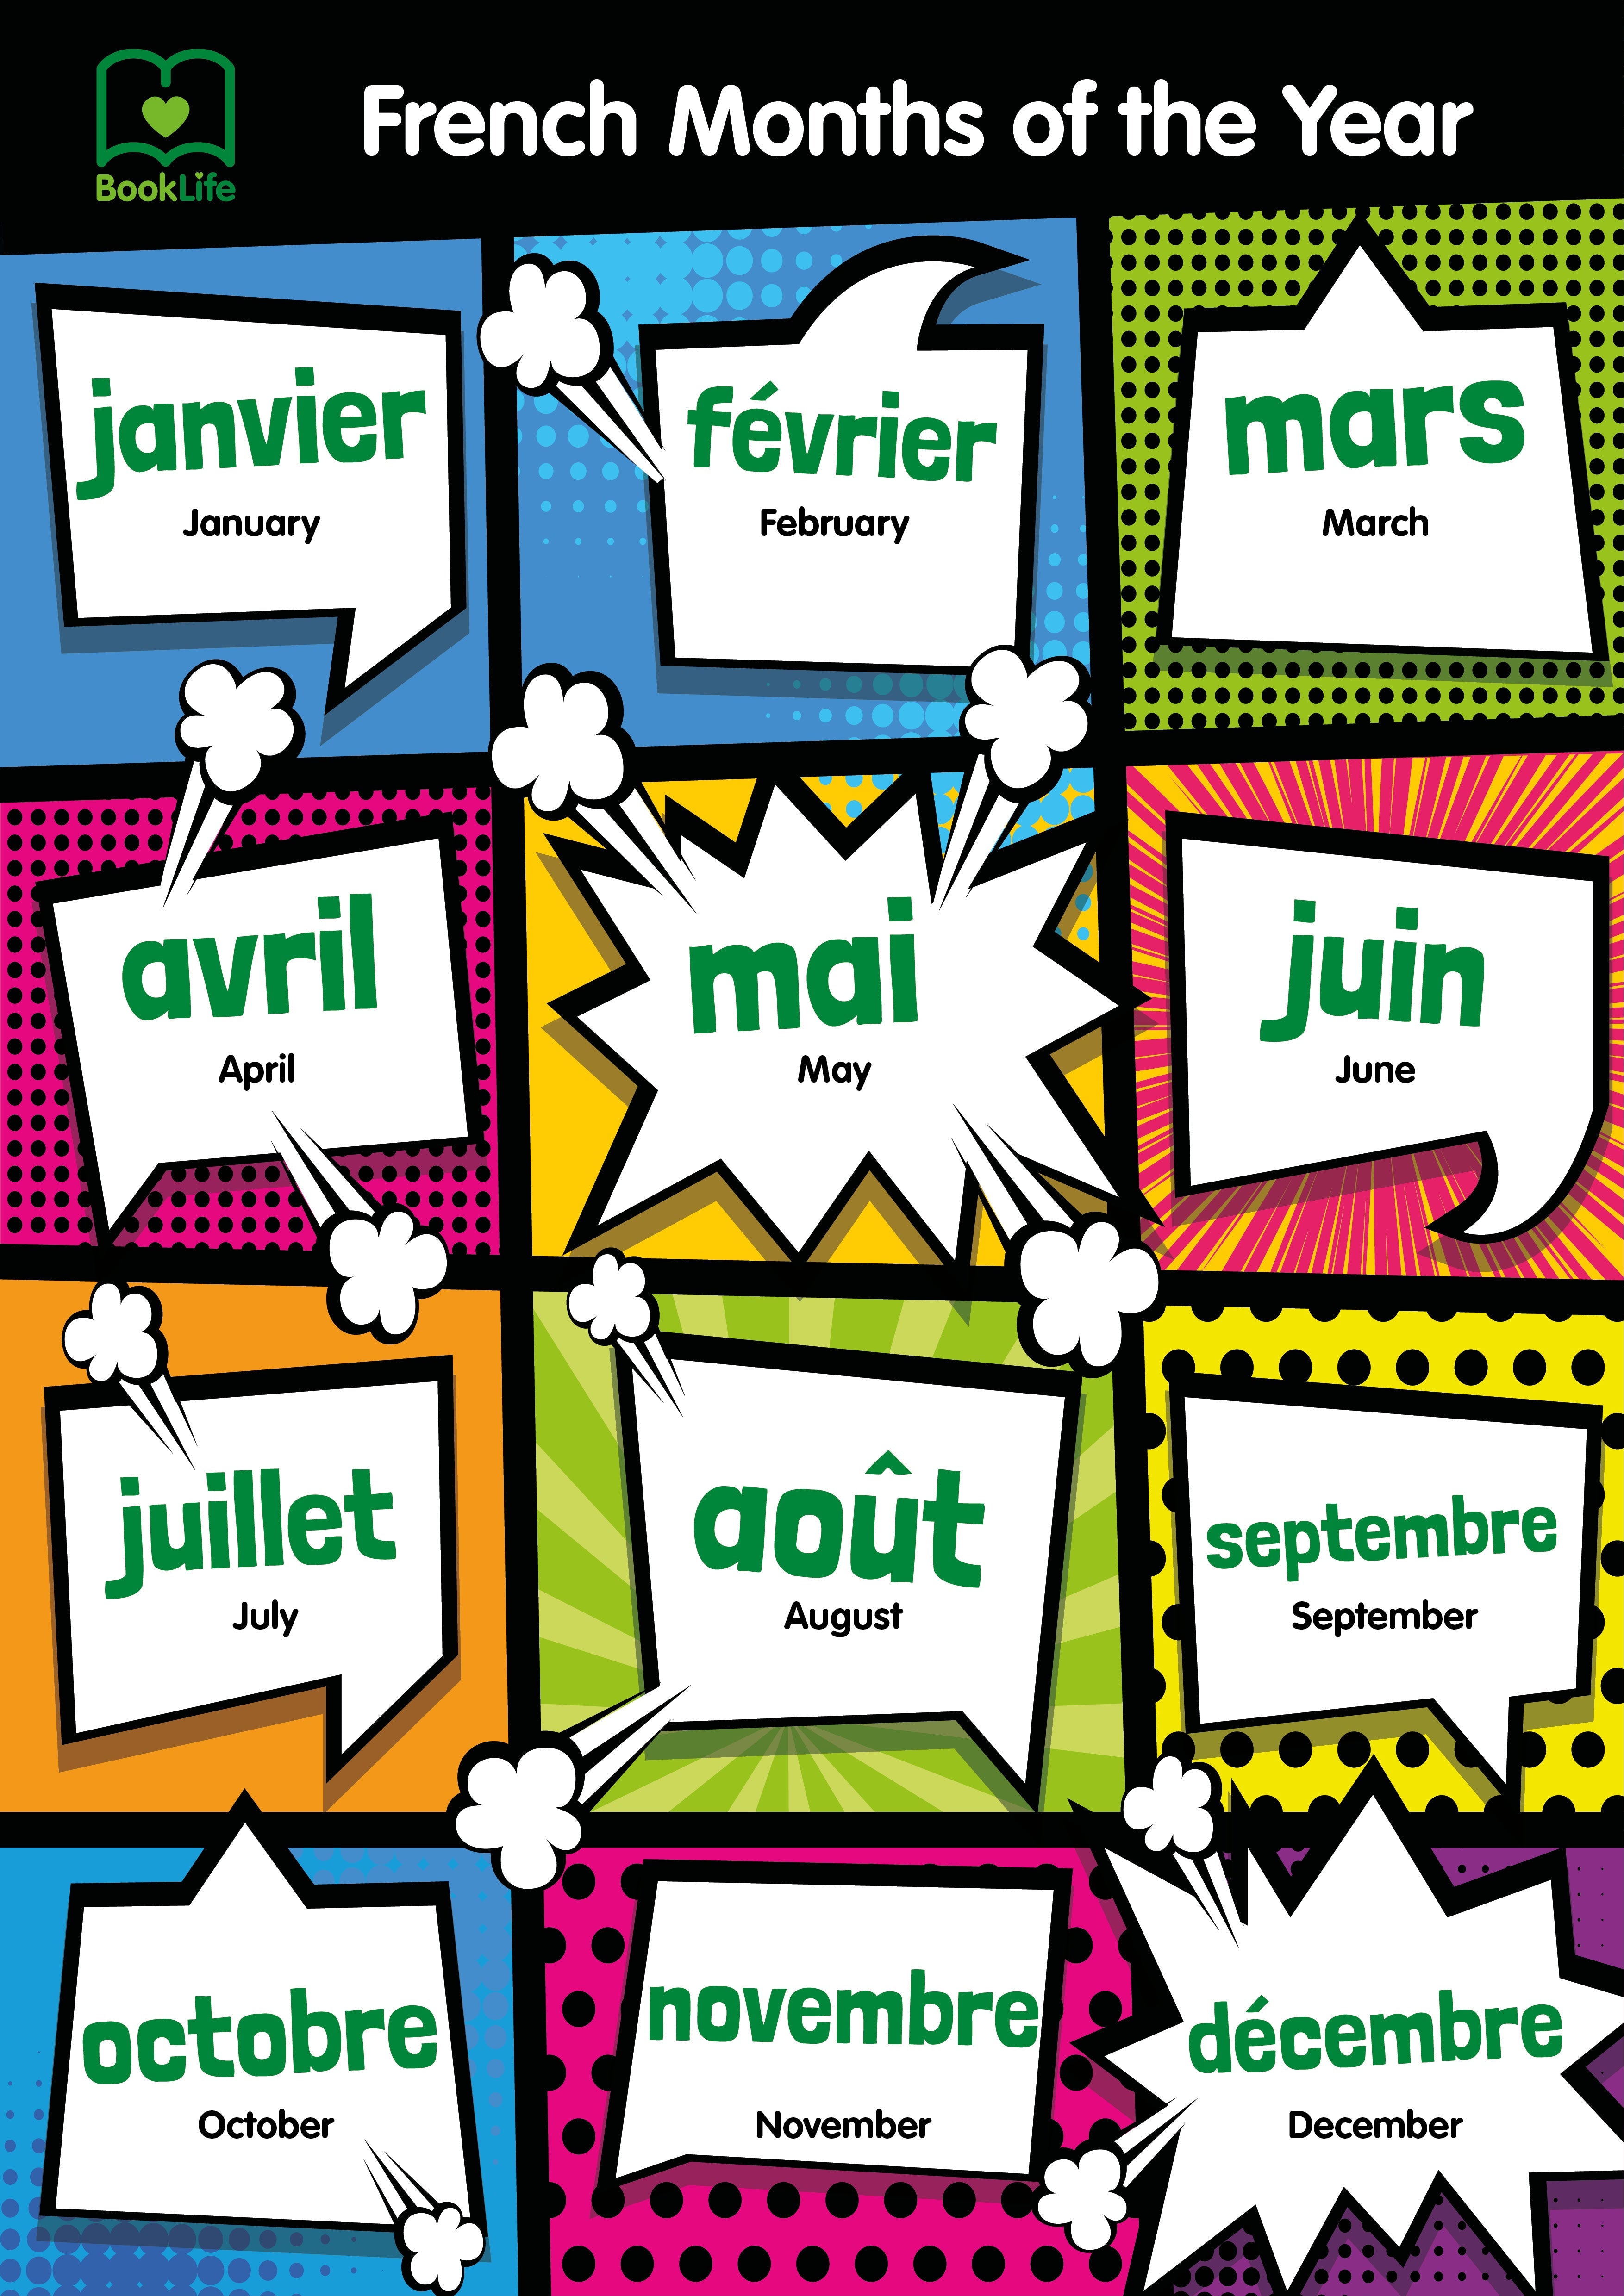 Free French Months of the Year Poster by BookLife